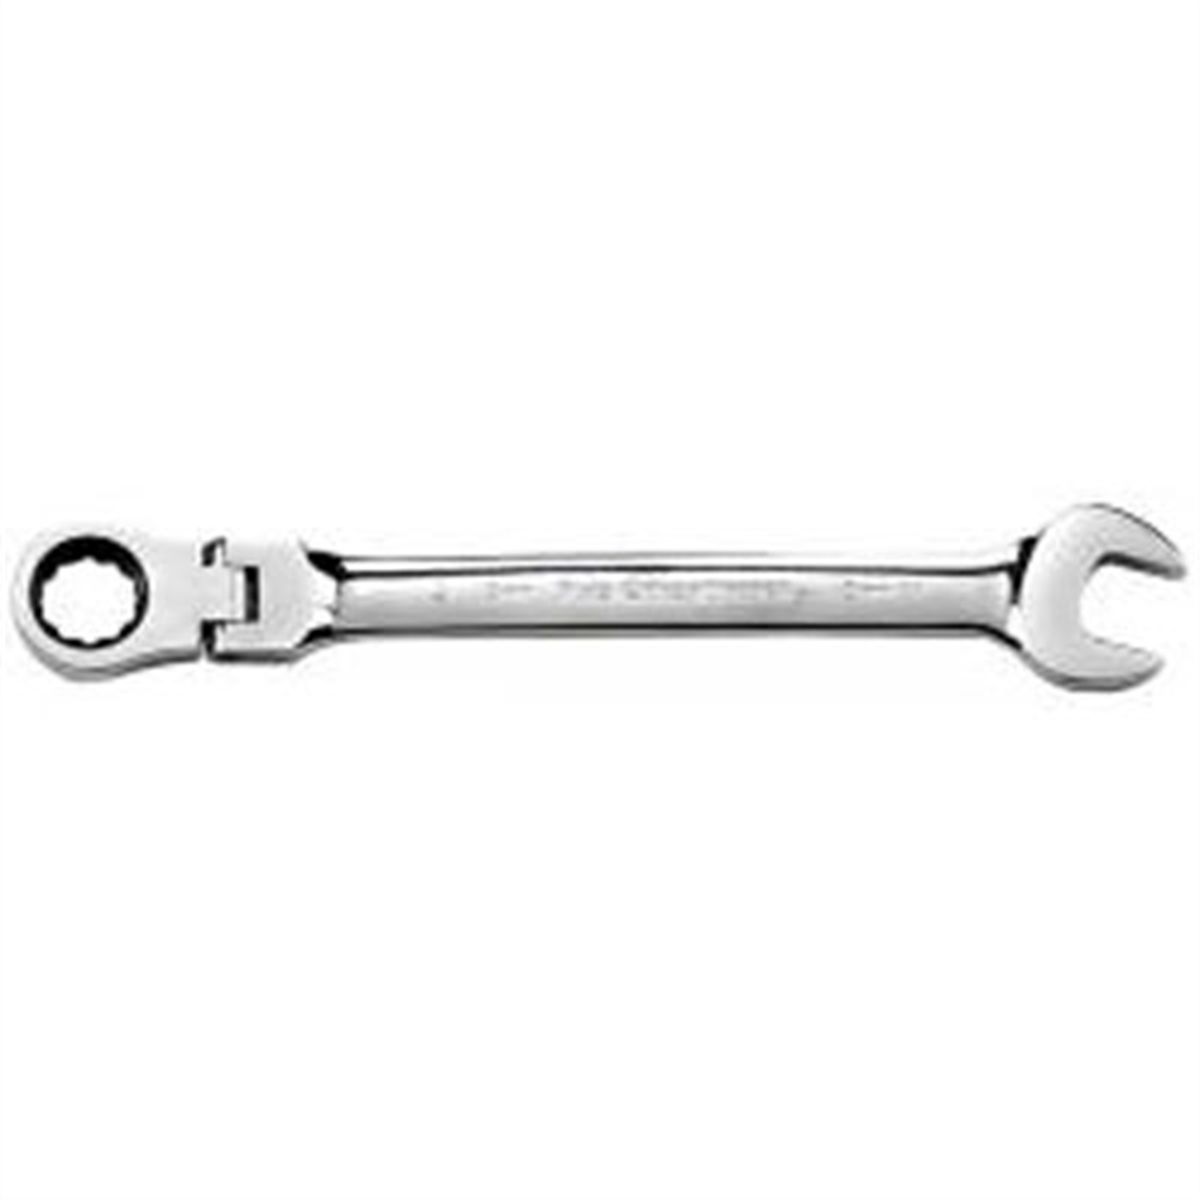 Metric Flex Ratcheting GearWrench - 25 mm